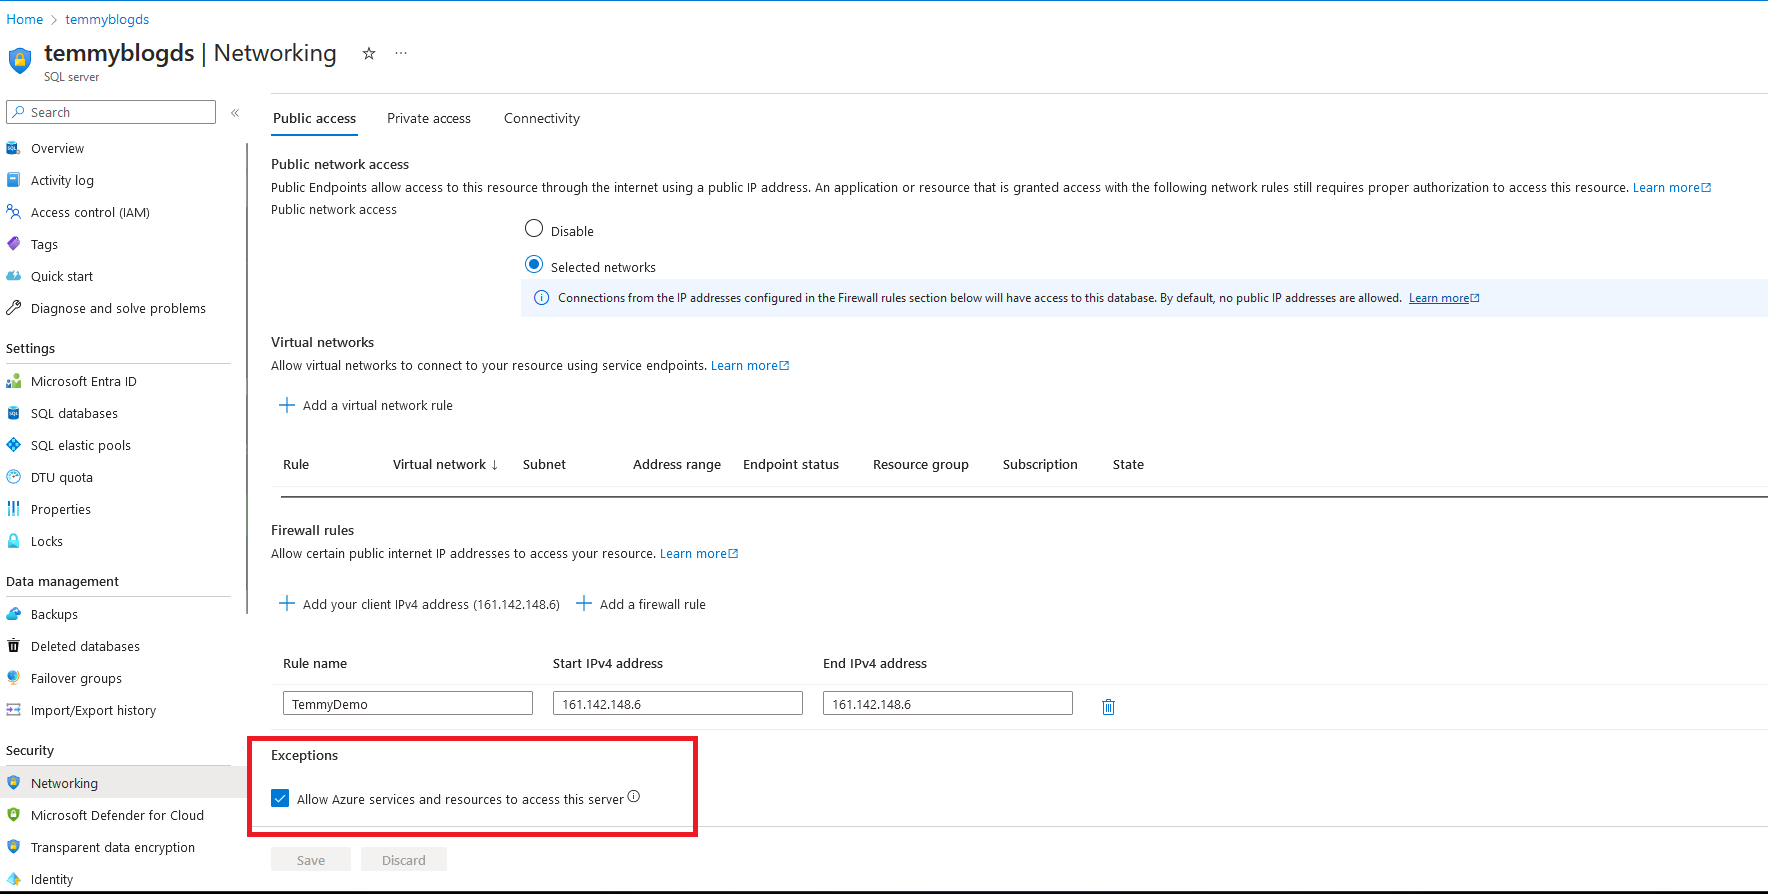 Allow Azure services and resources to access this server